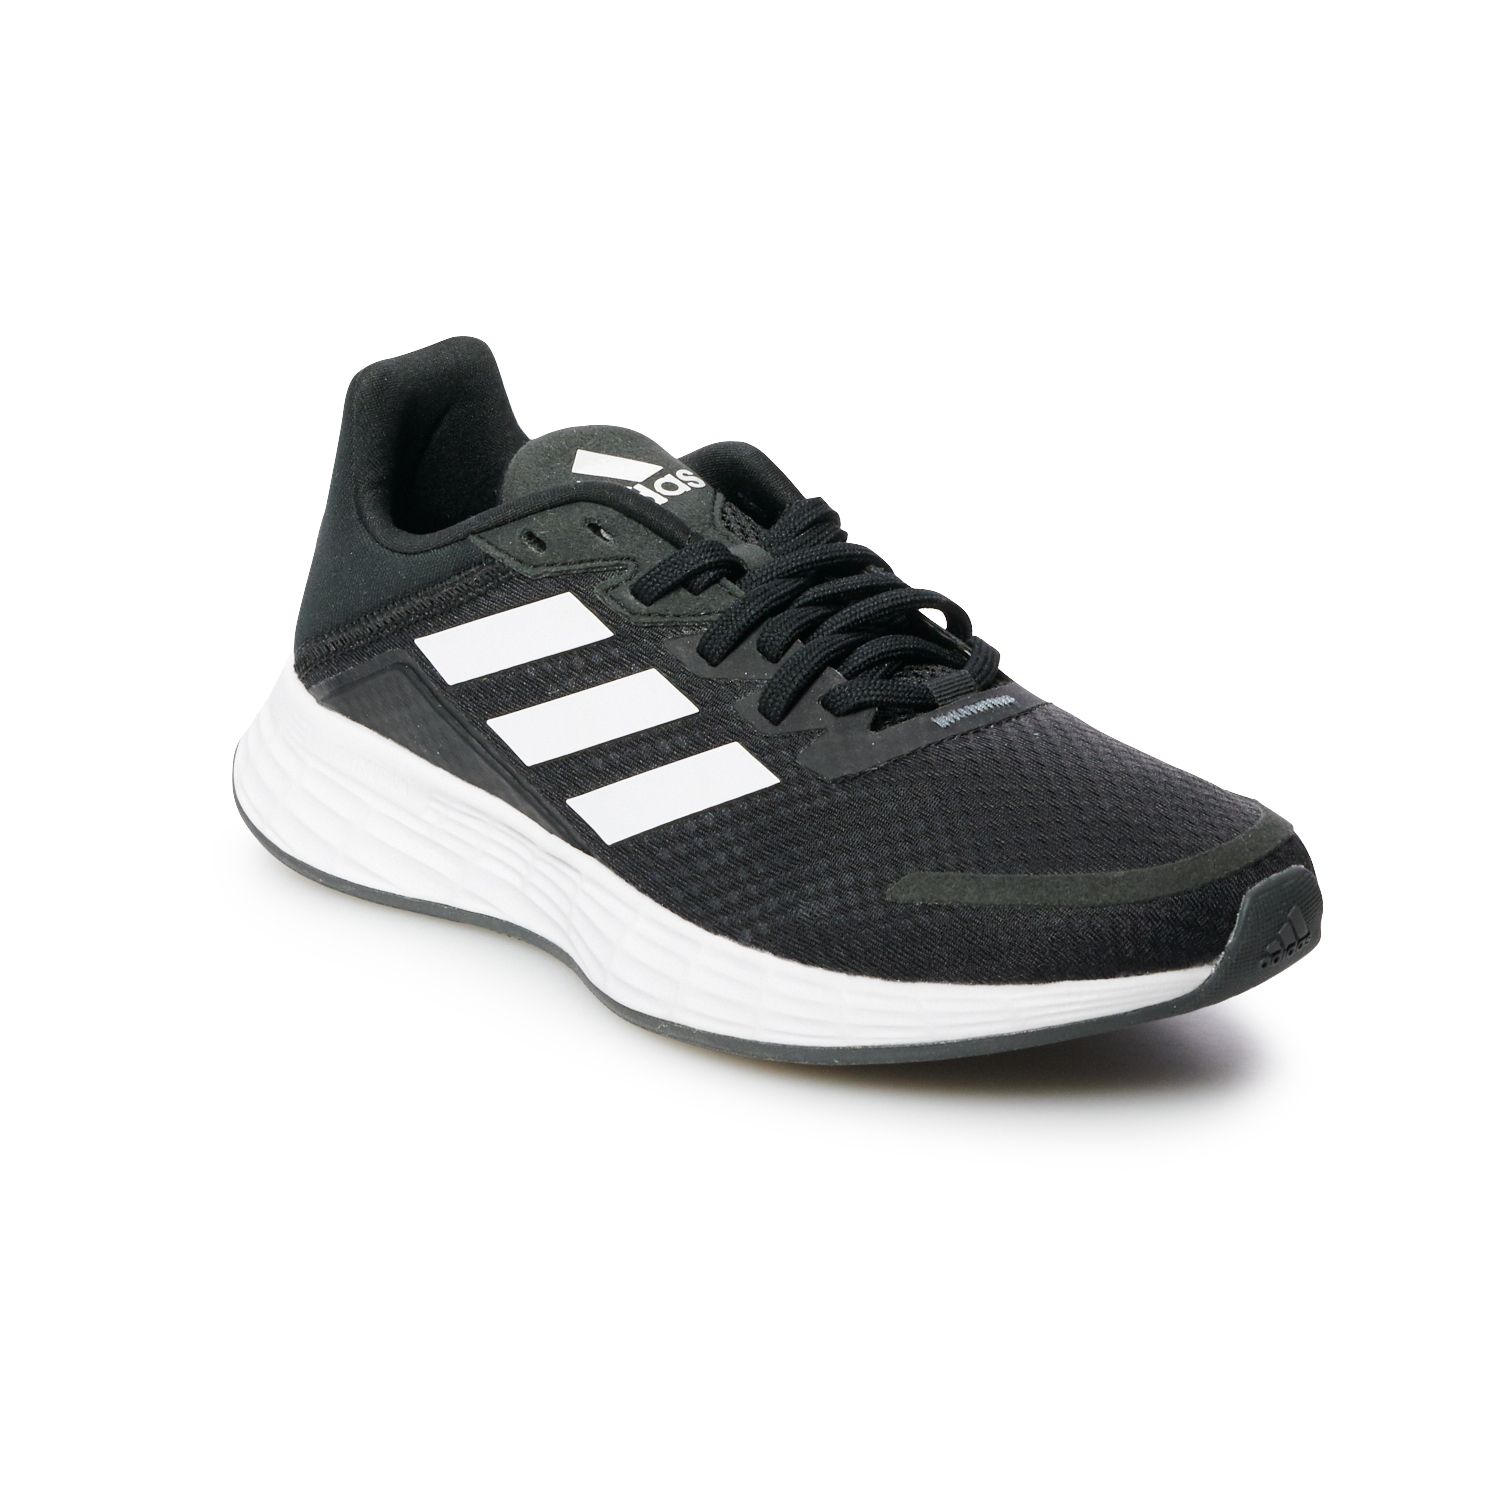 adidas shoes cheapest price